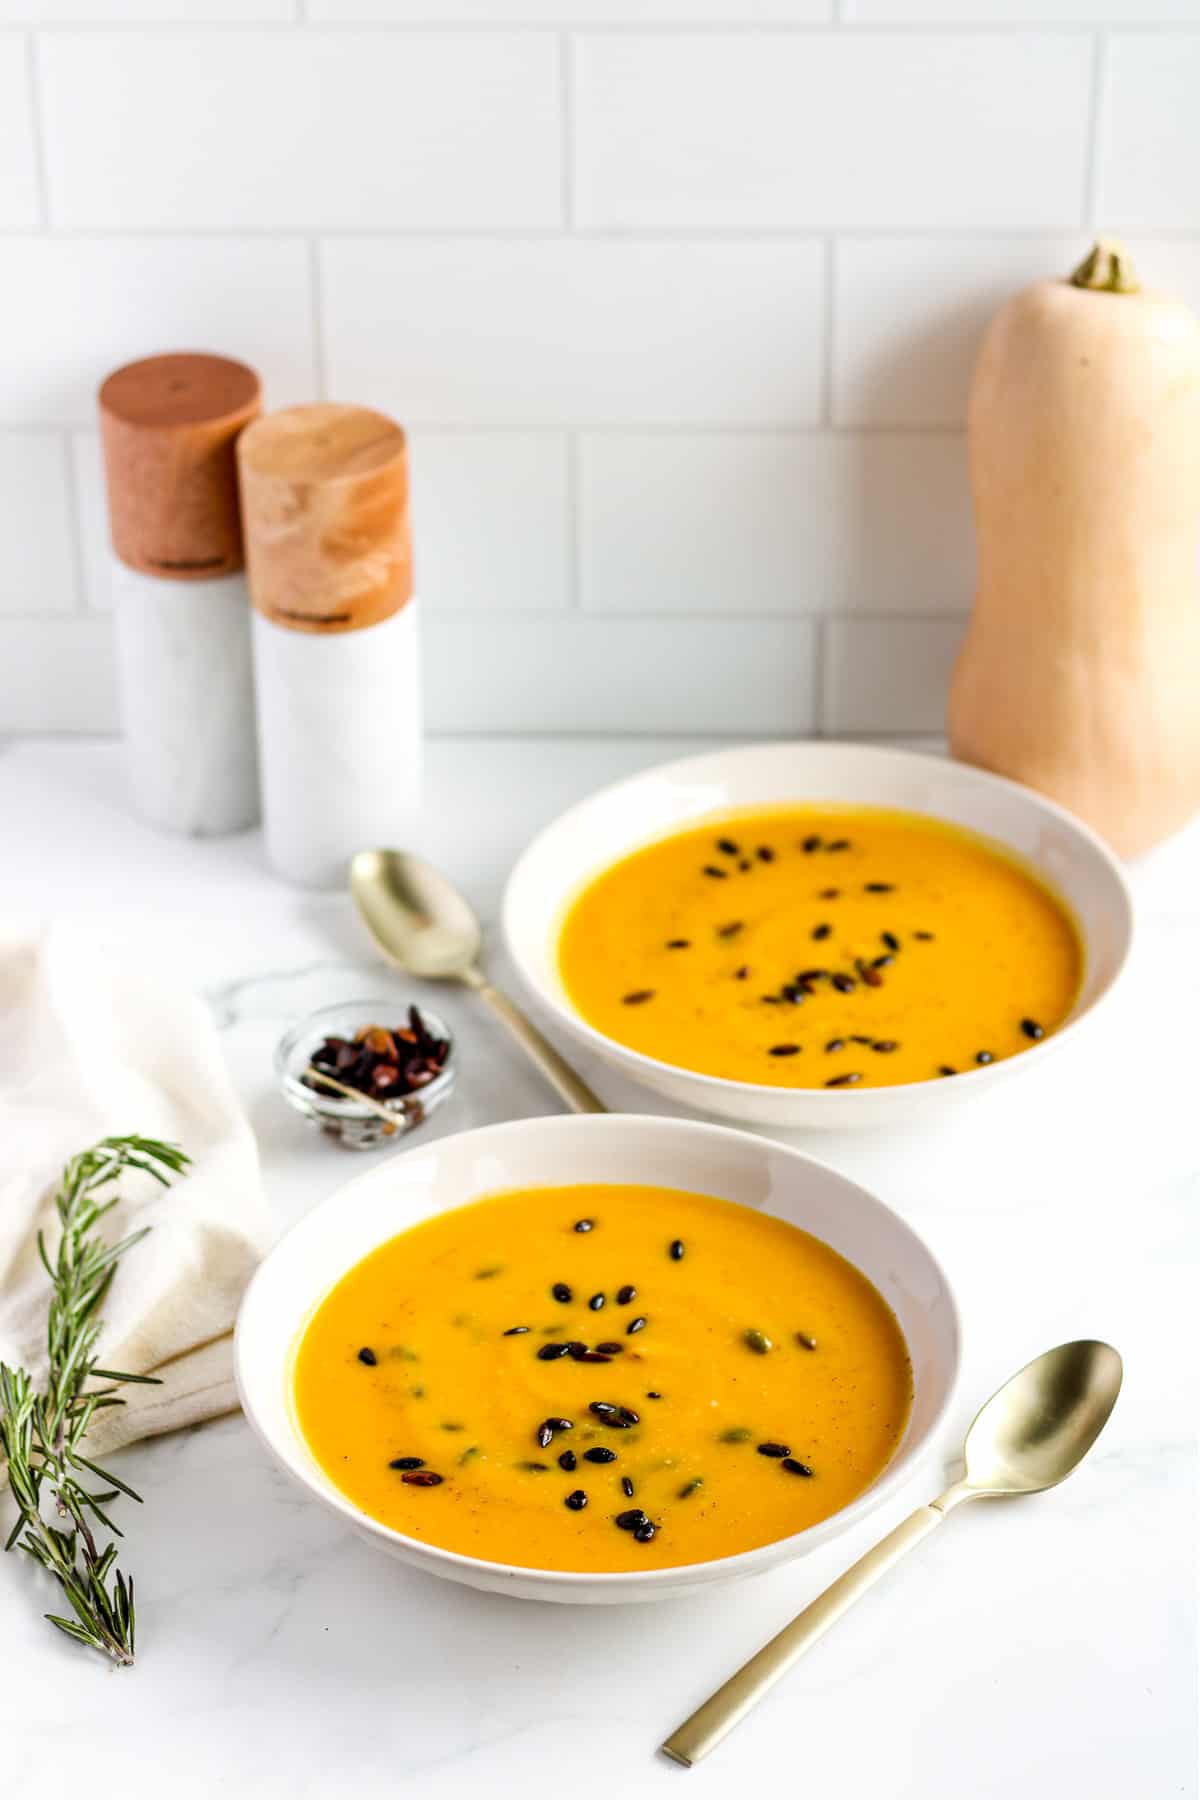 Butternut squash and carrot soup in bowls.